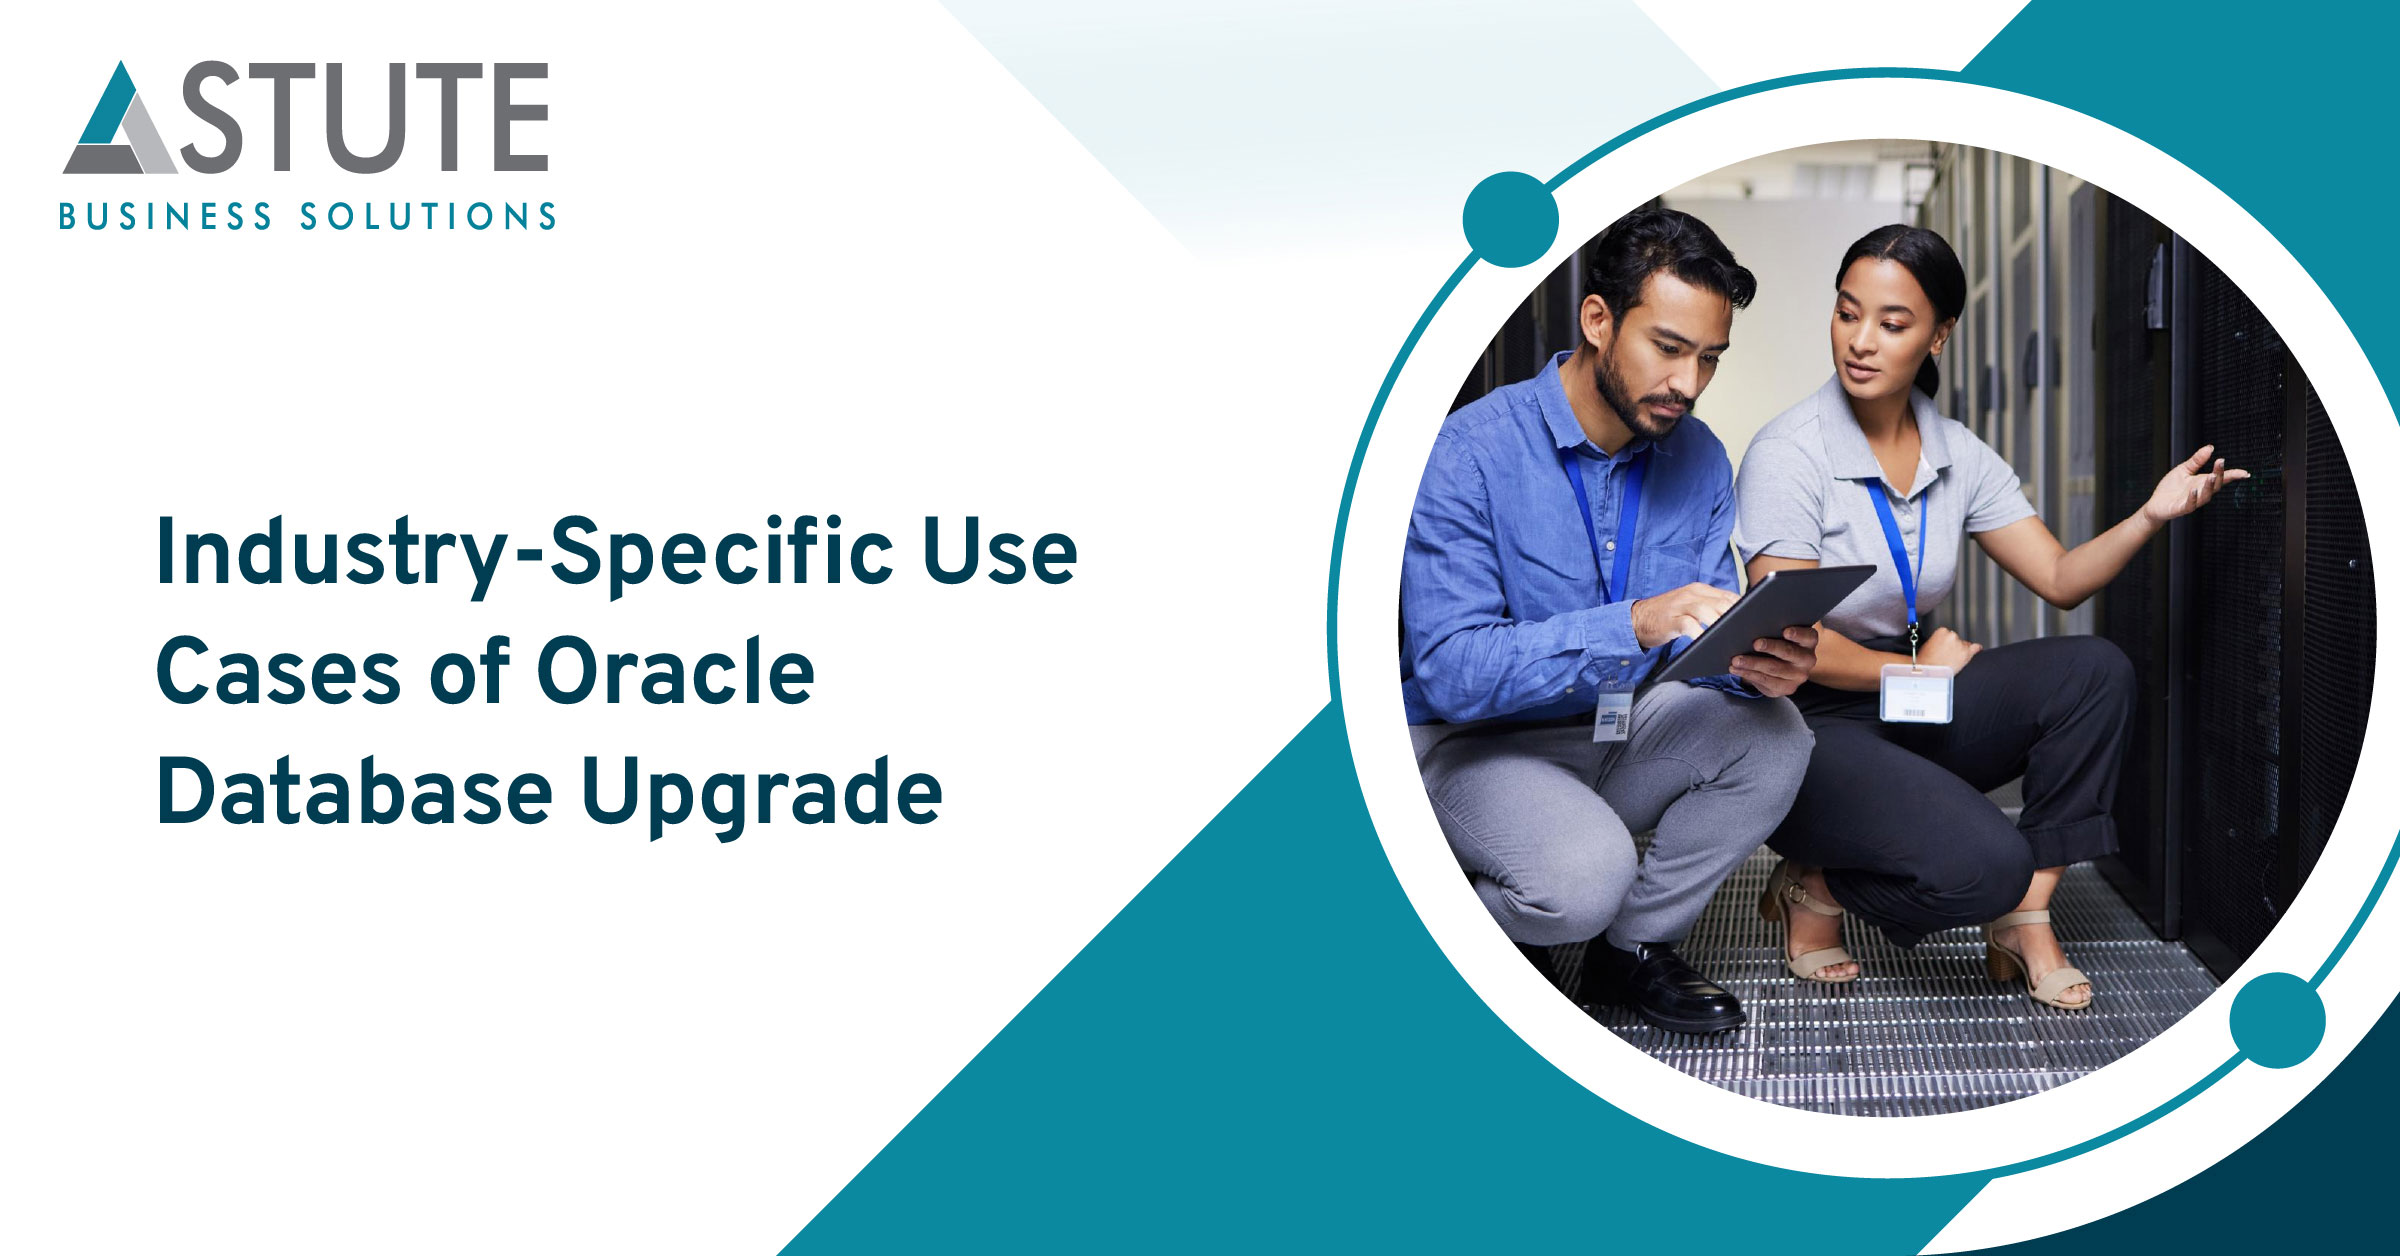 Industry-Specific Use Cases of Oracle Database Upgrade